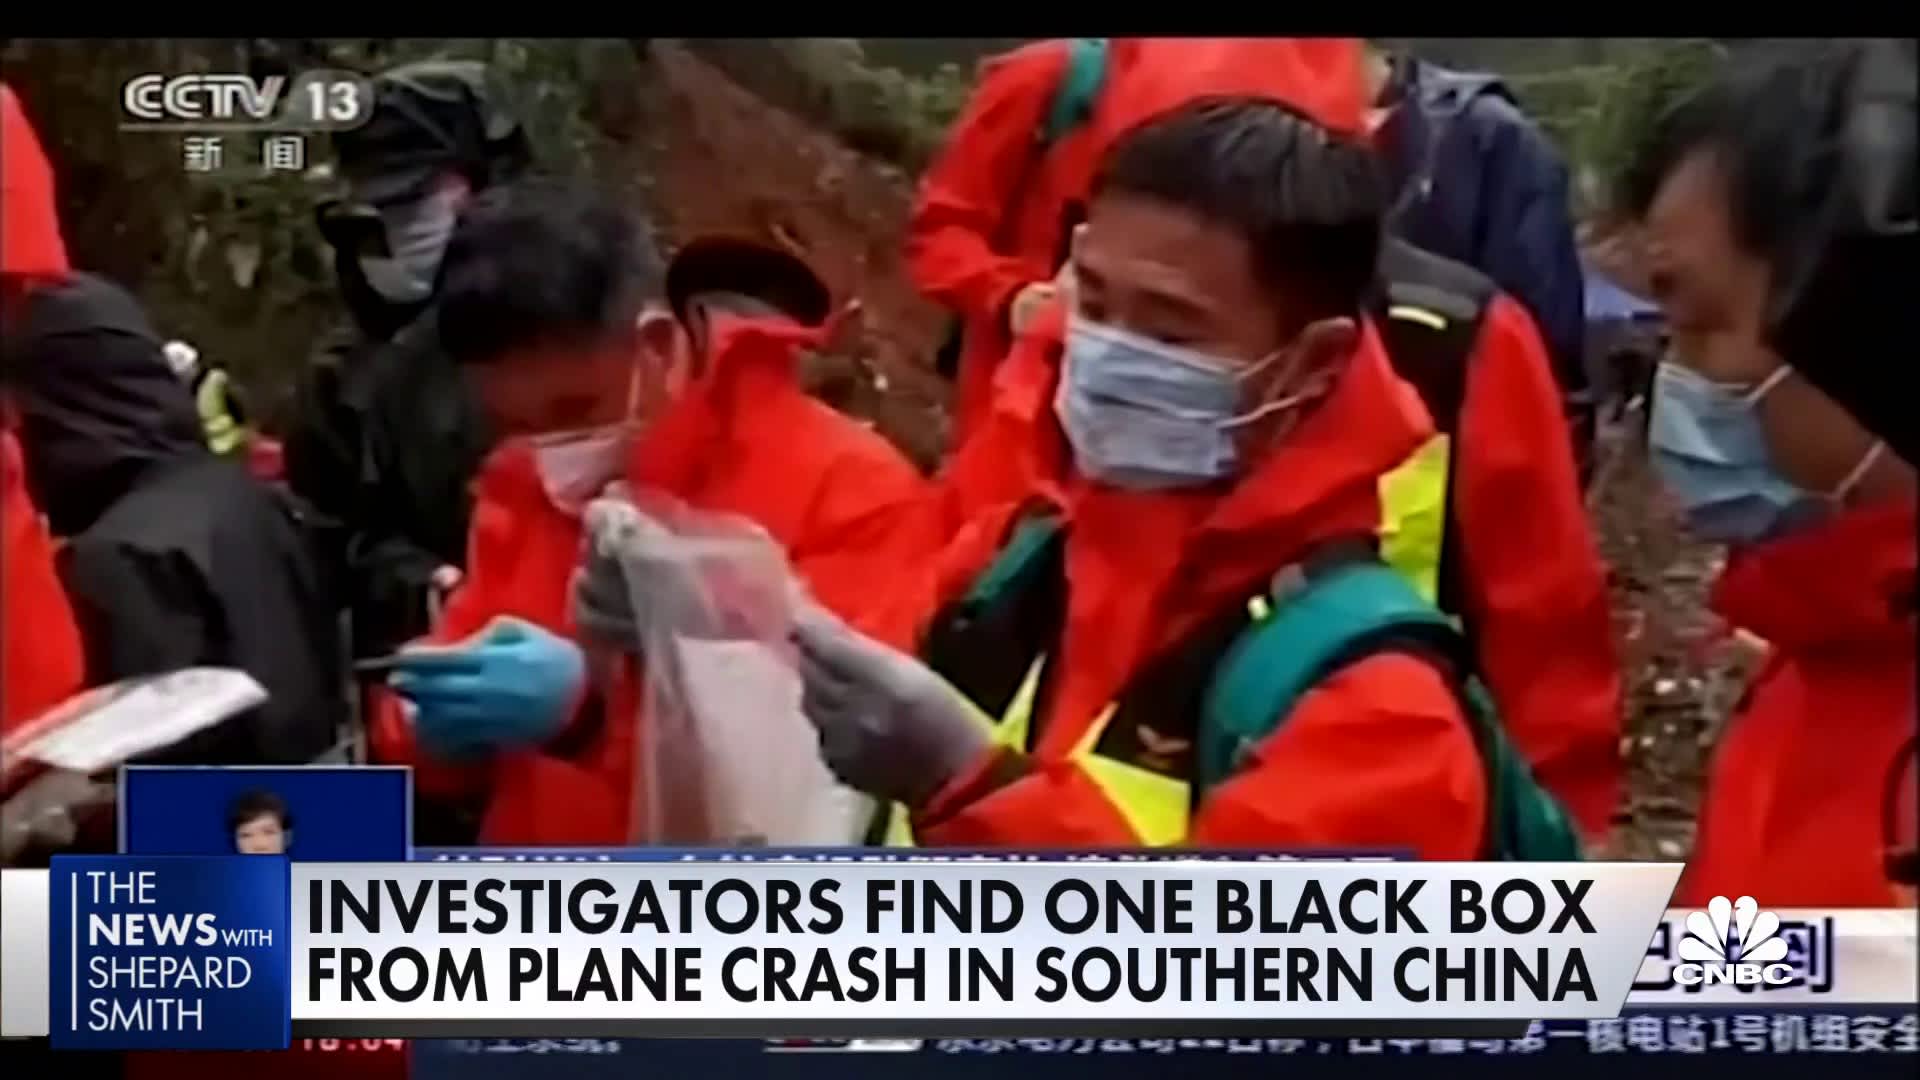 Investigators find one black box from plane crash in southern China